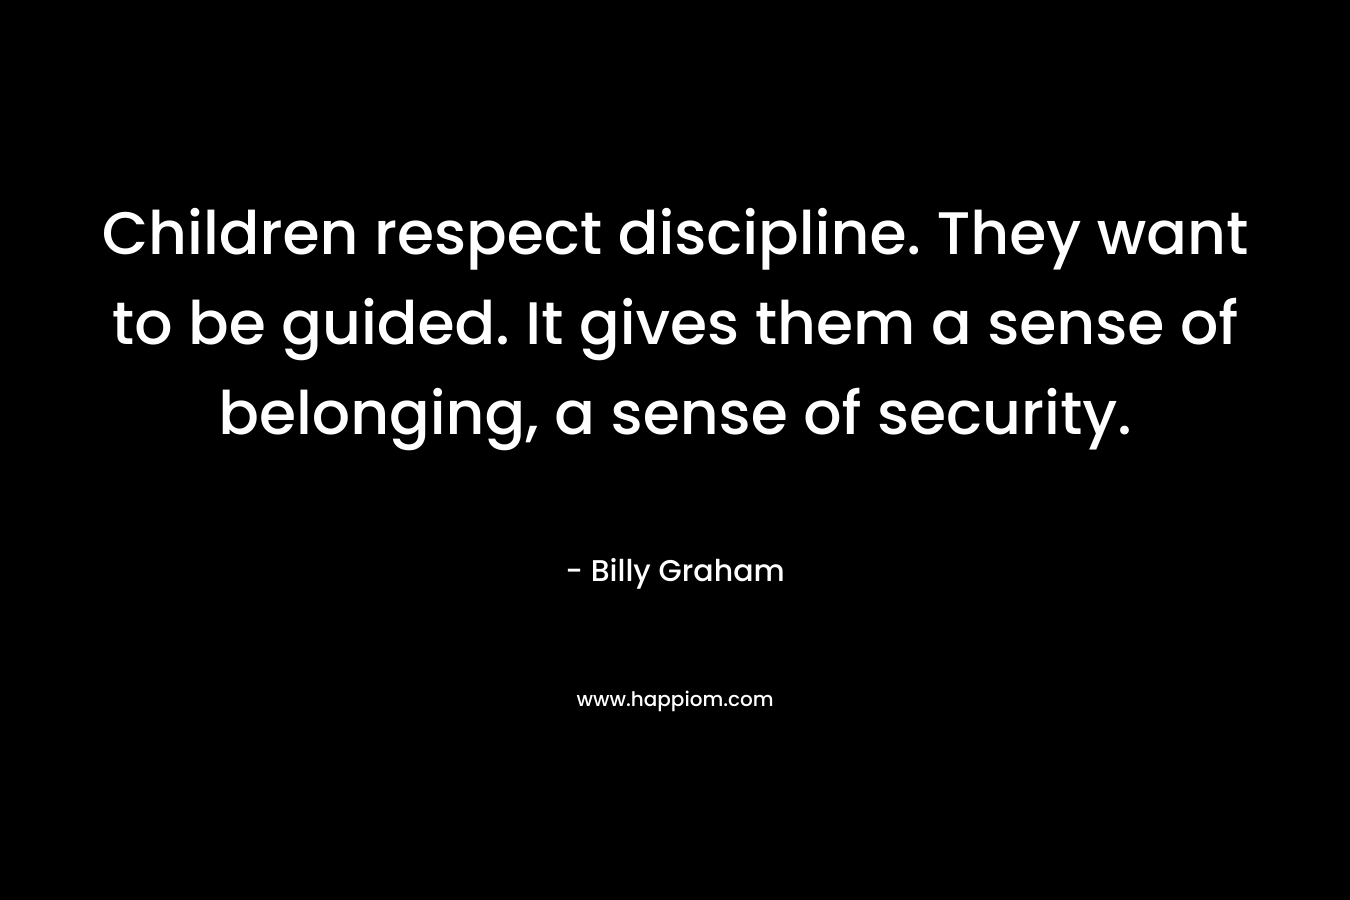 Children respect discipline. They want to be guided. It gives them a sense of belonging, a sense of security.